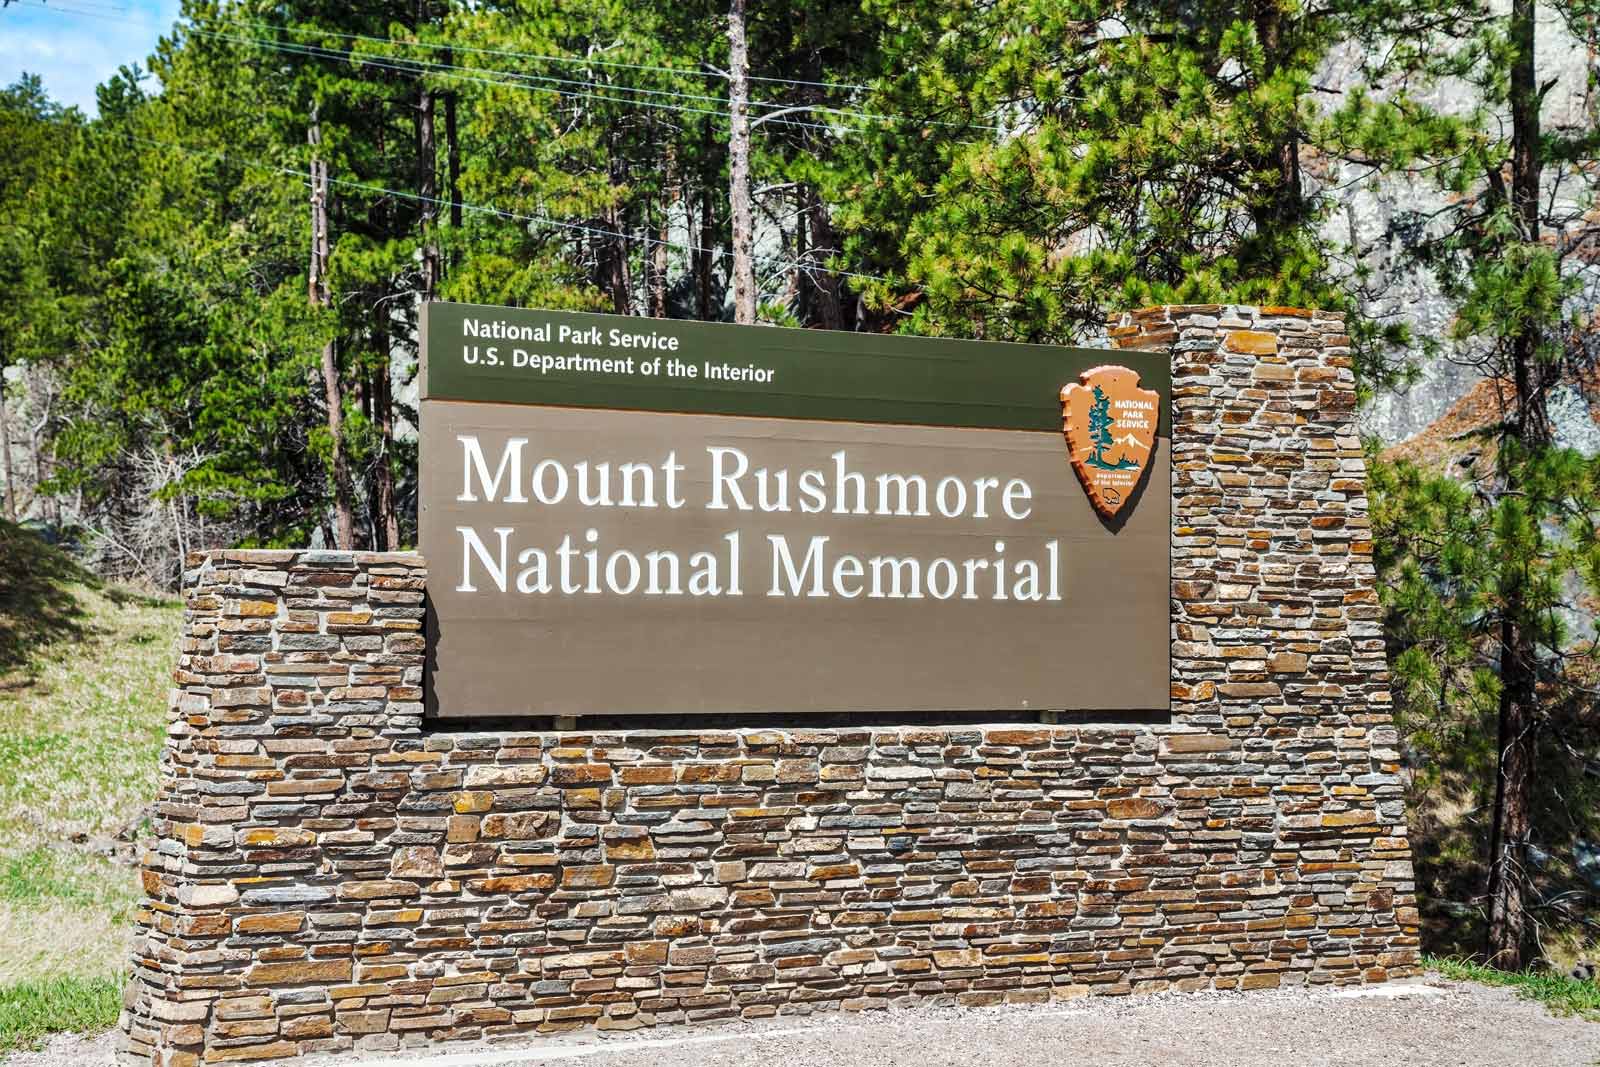 Guided tours at Mount Rushmore